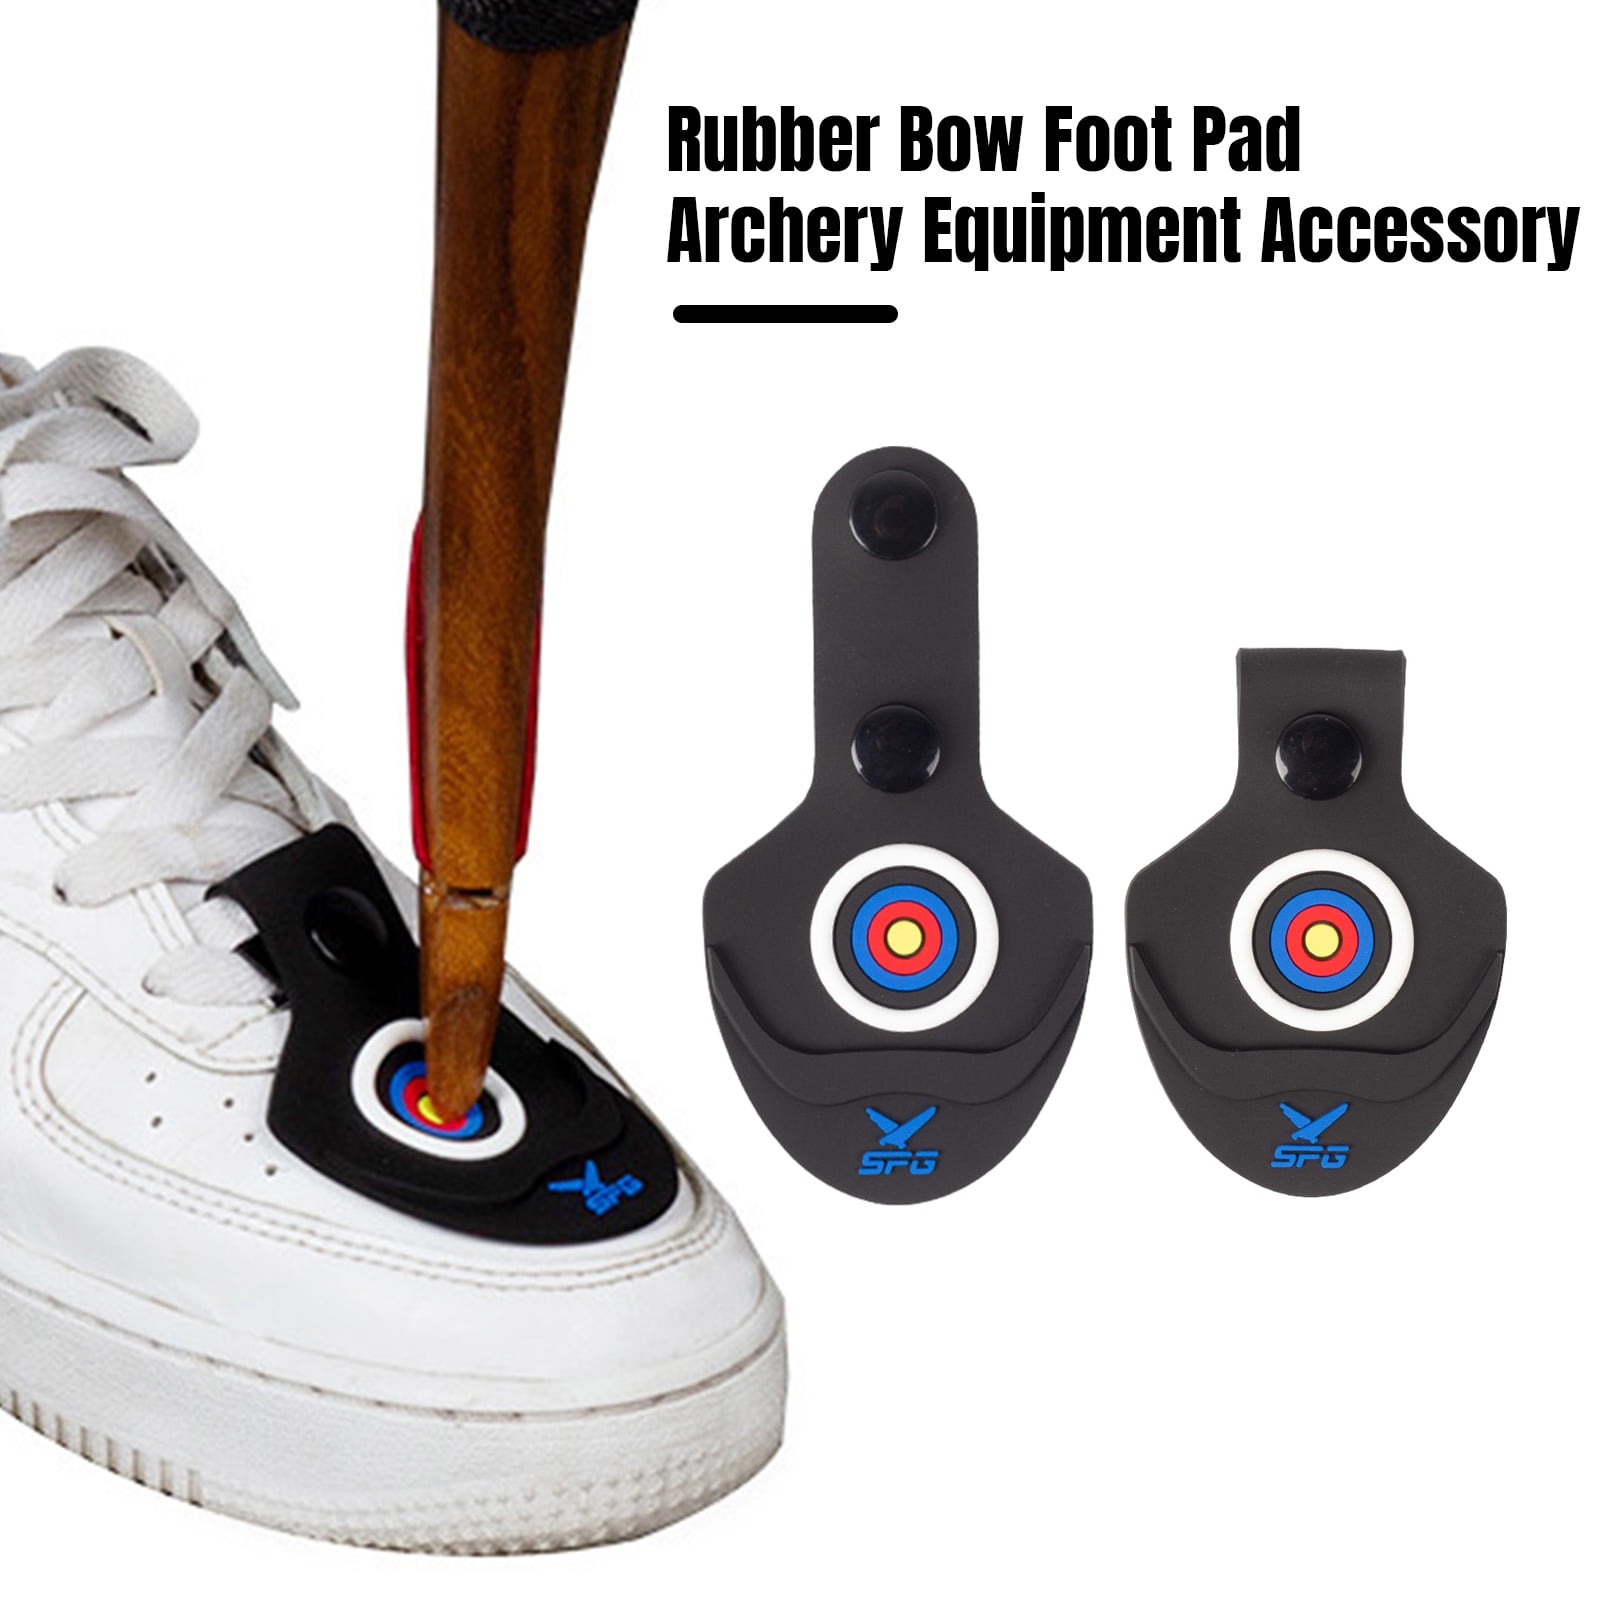 Rubber Bow Limb Foot Pad Outdoor Recurve Bow Tip Protector Pad Archery ...